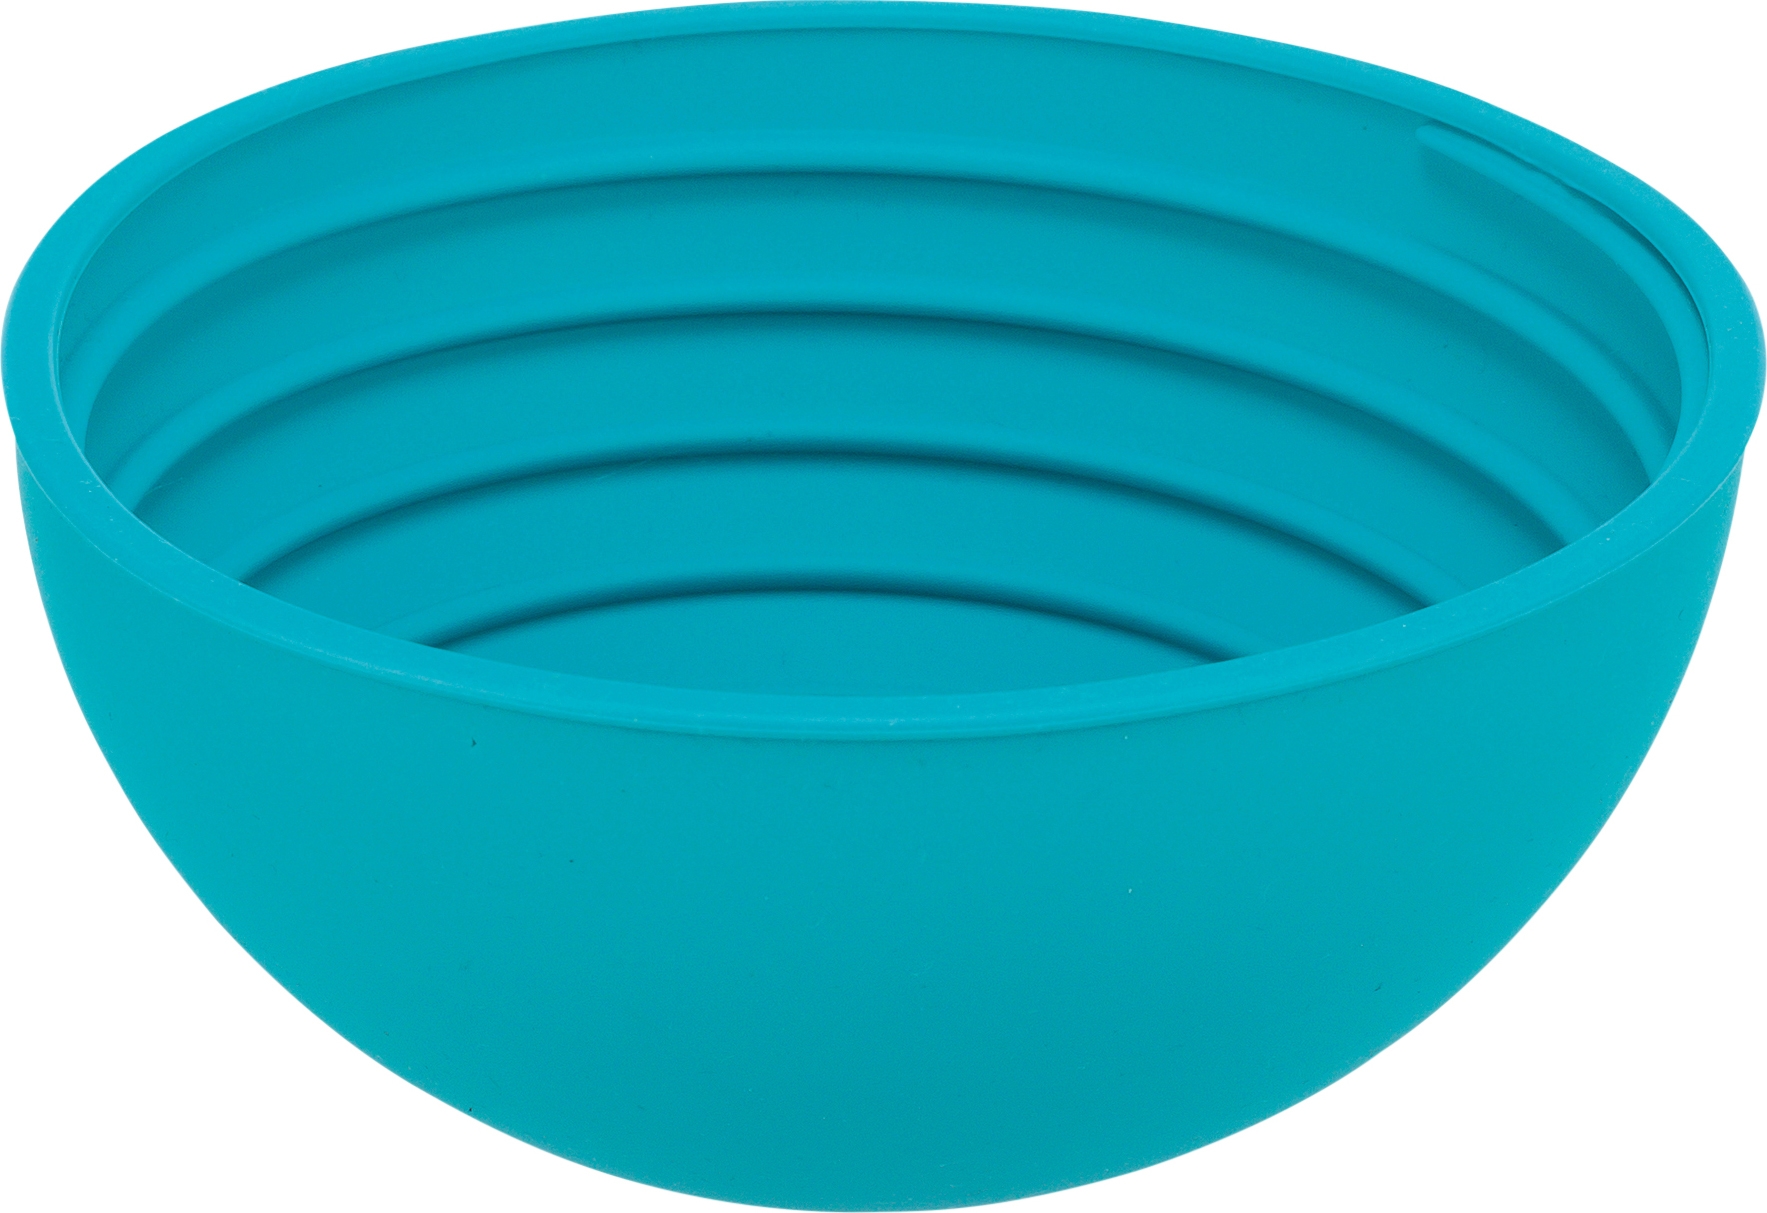 Lick'n'Snack bowl, silicone.